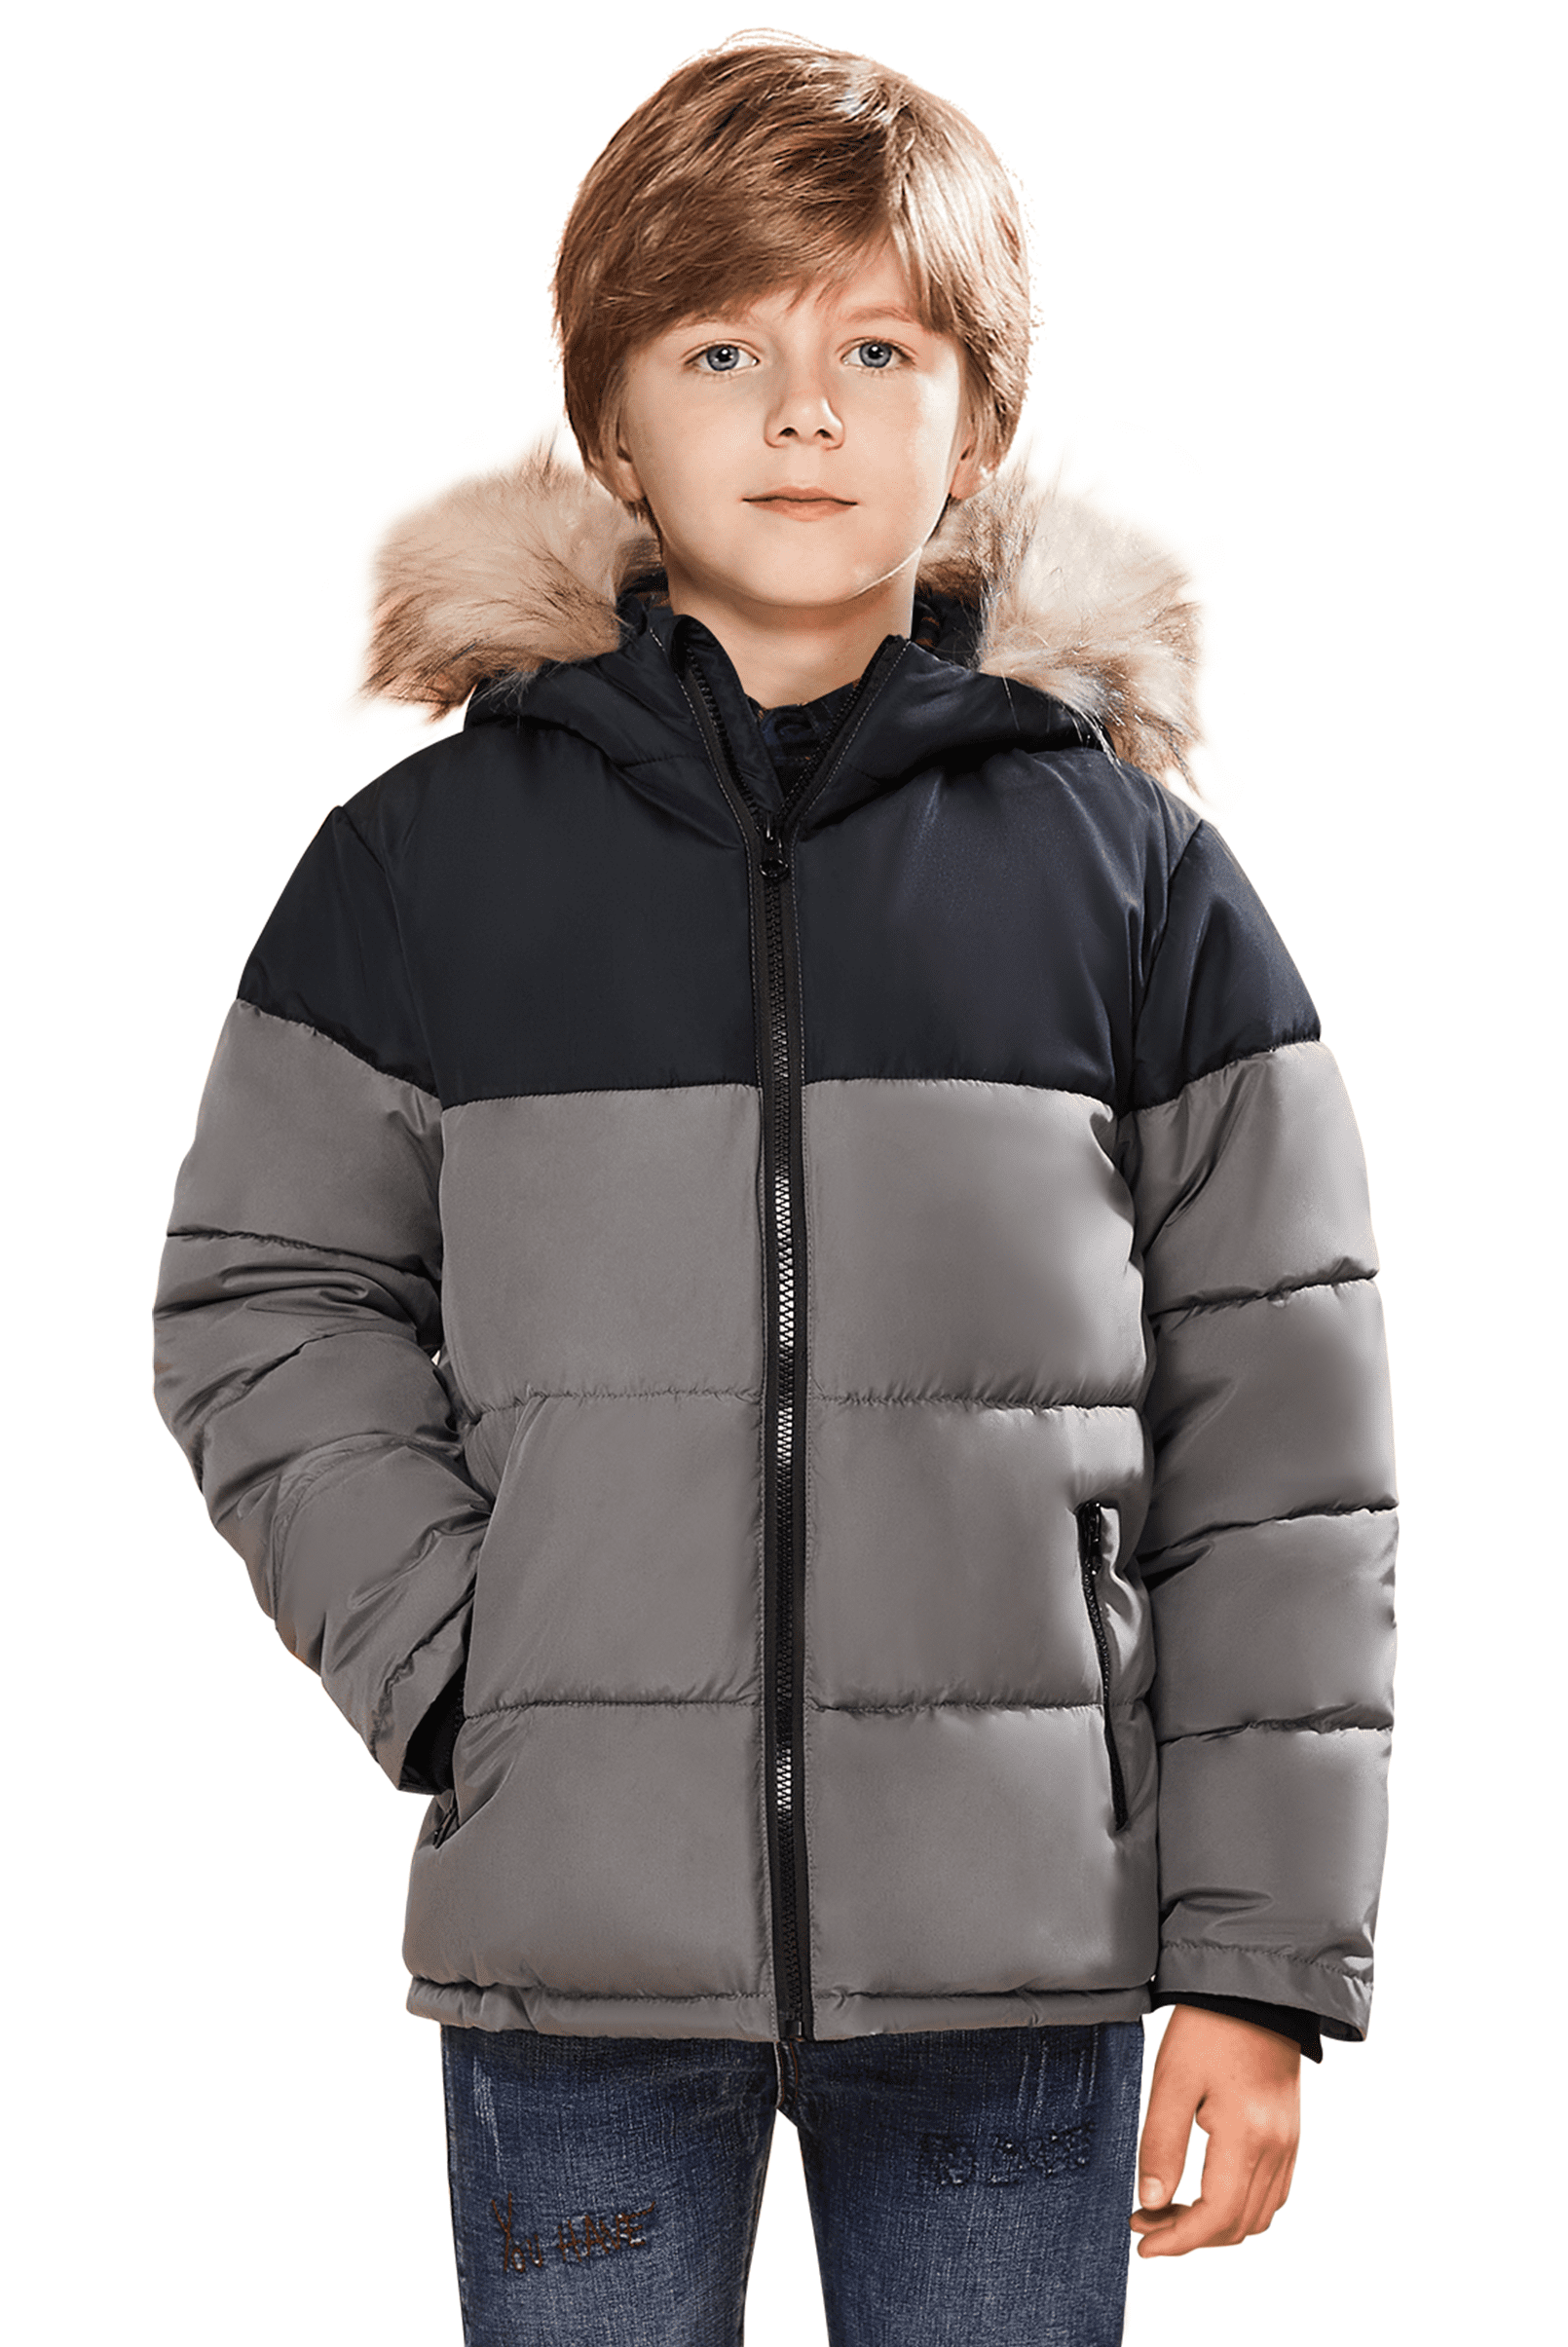 SOLOCOTE Boys Winter Coats Puffer Fake-Down Mid-Weight Hooded Padded ...